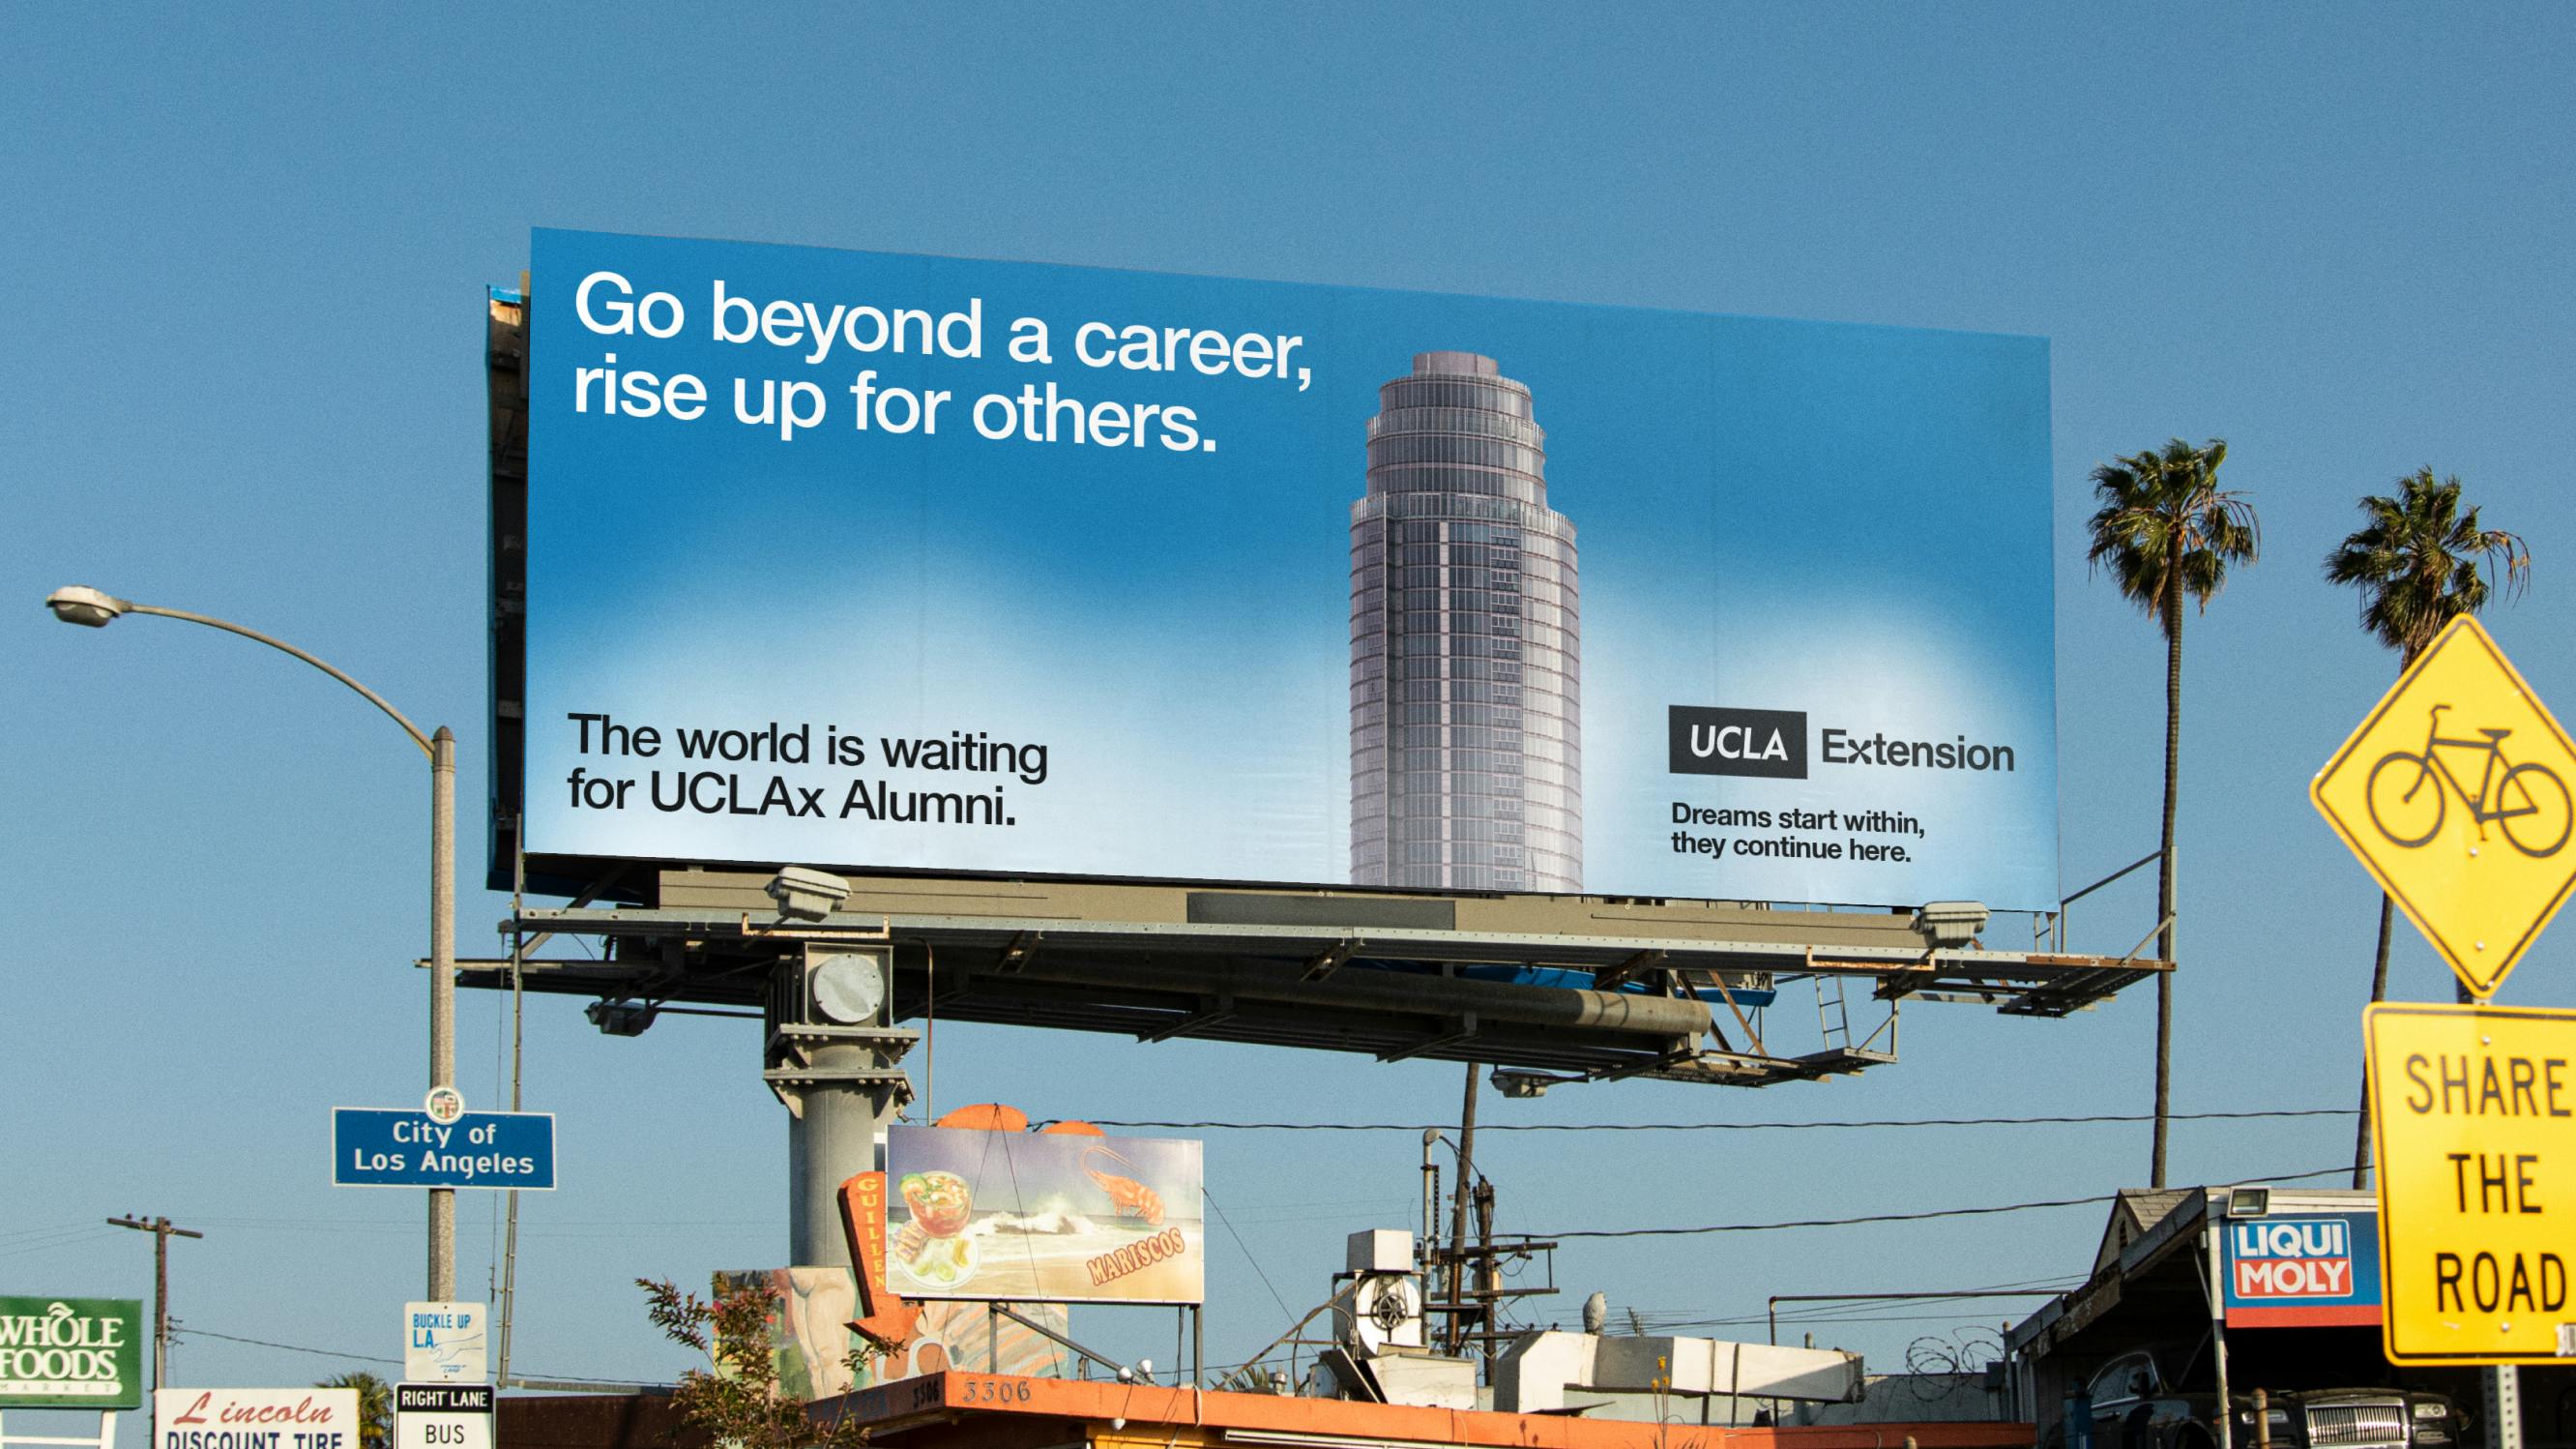 A billboard for UCLA Extension